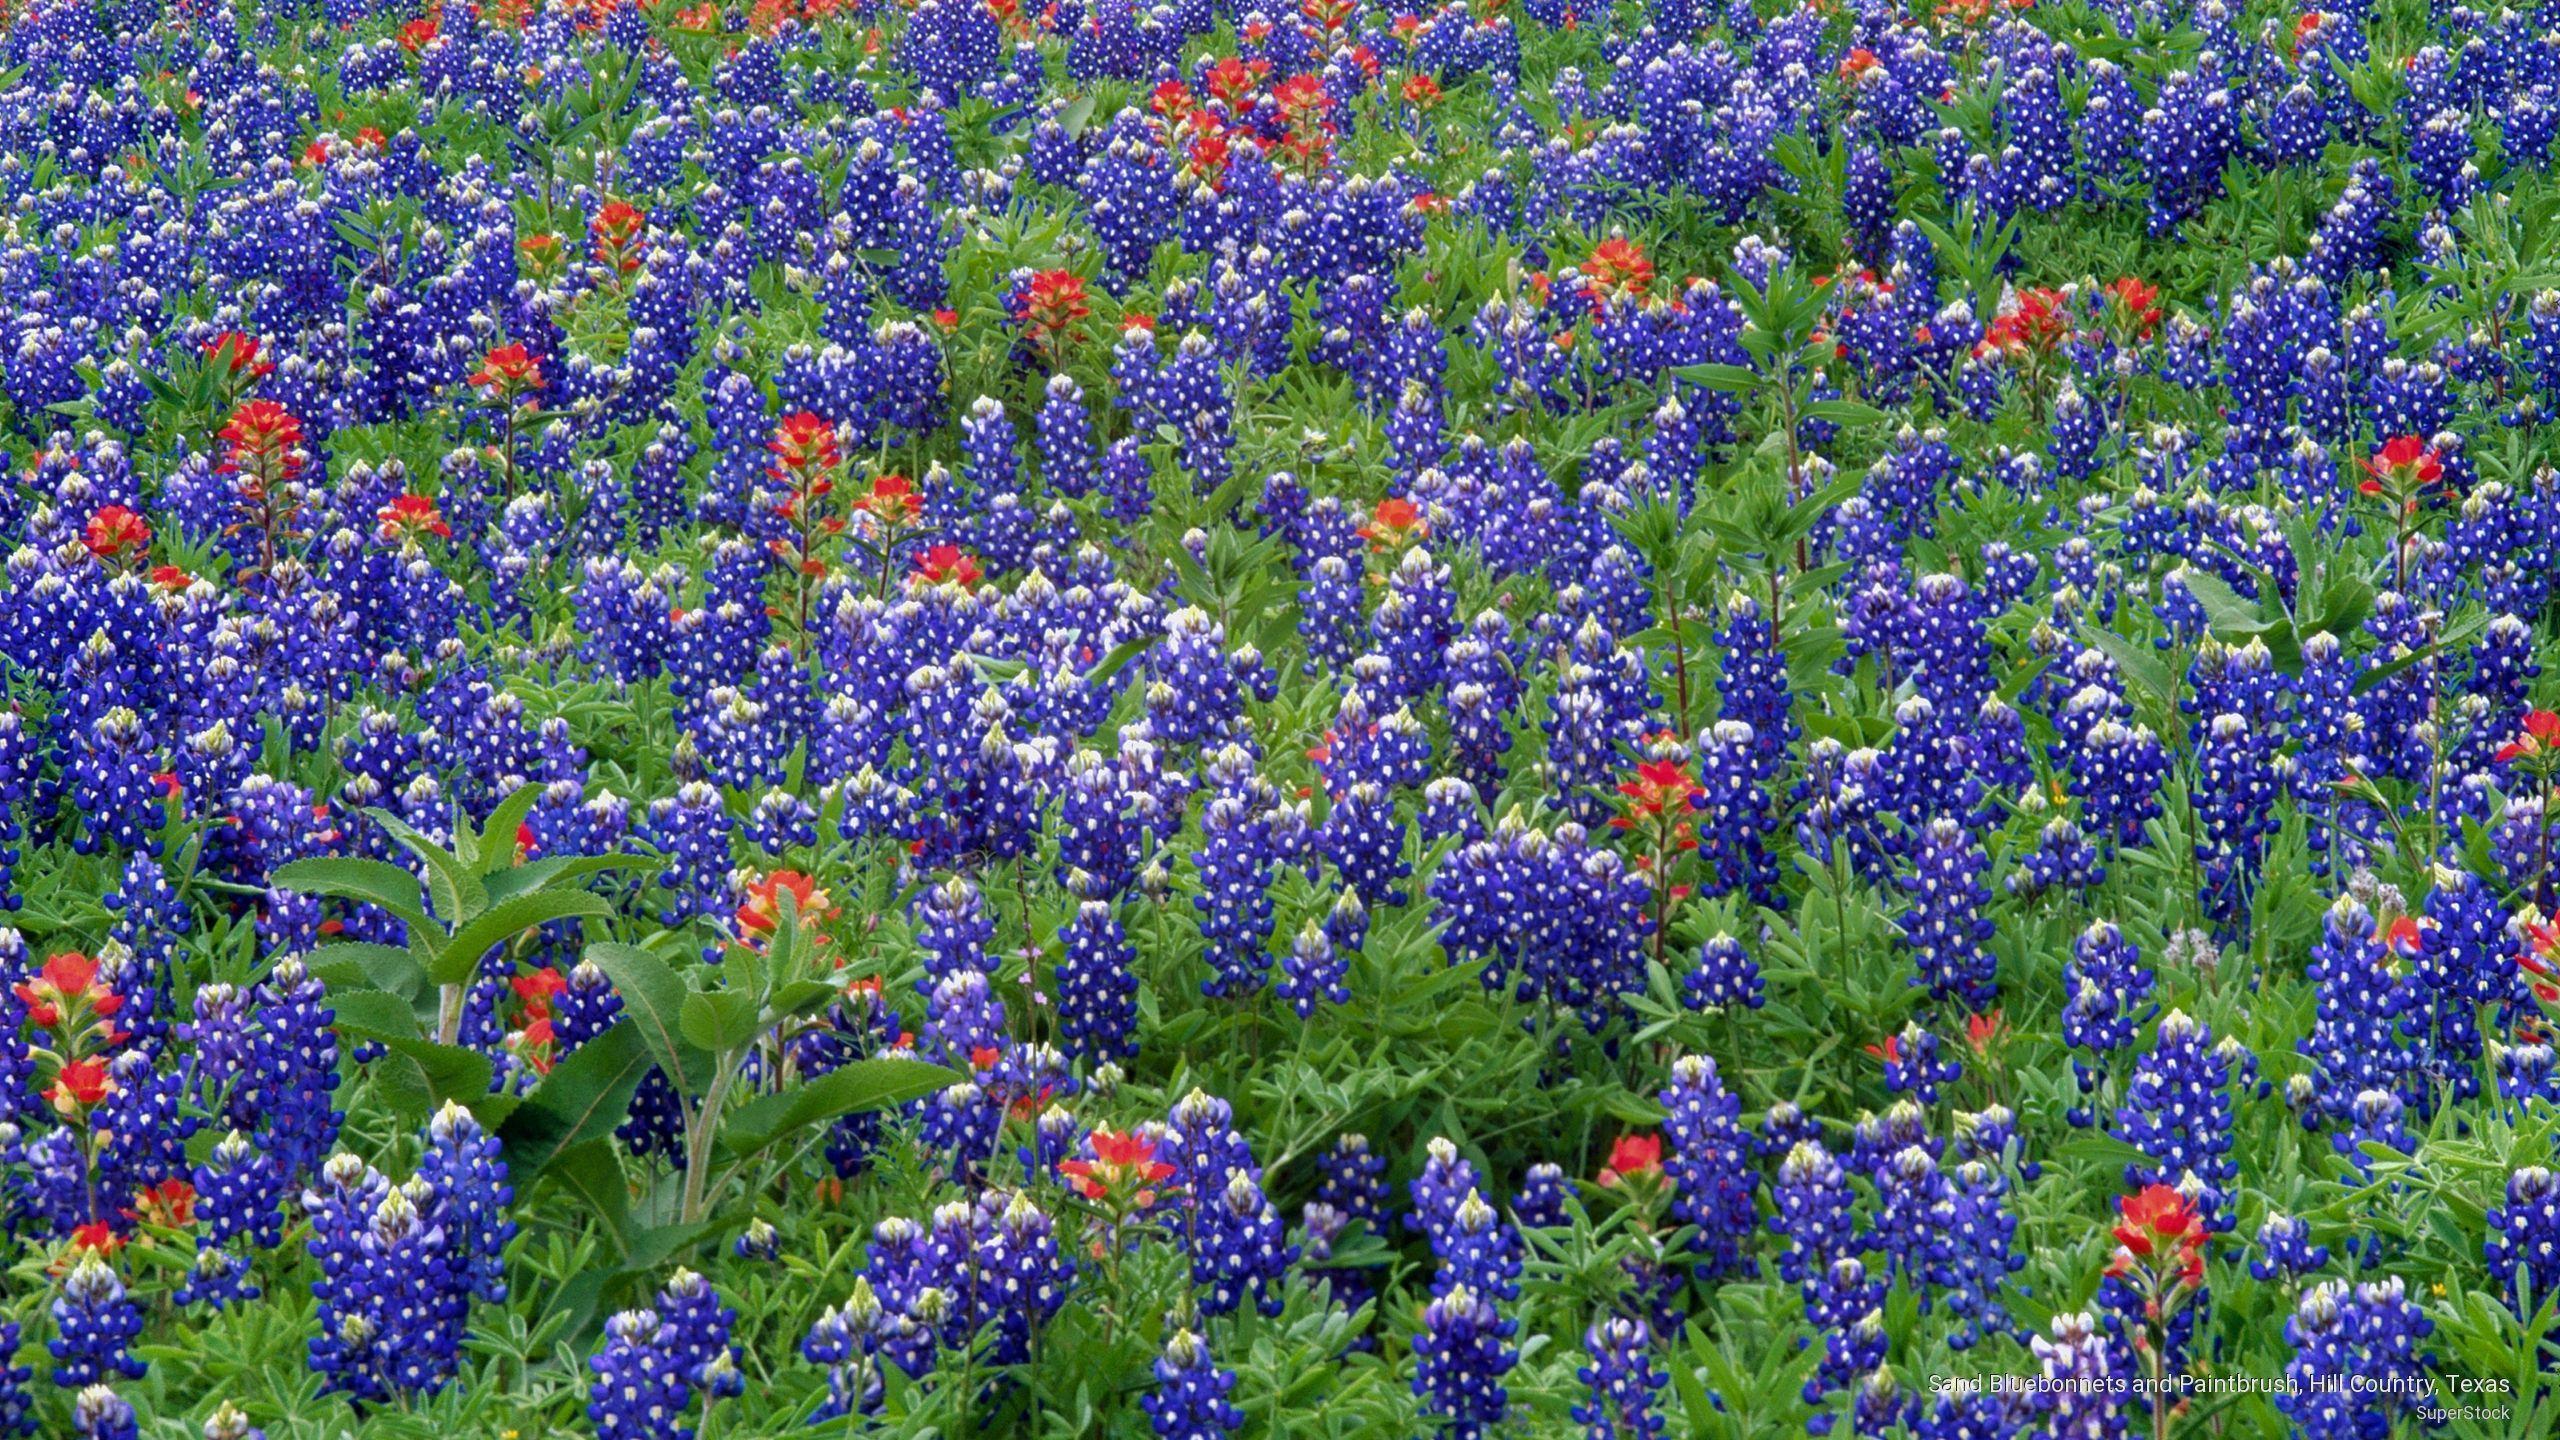 Sand Bluebonnets and Paintbrush, Hill Country, Texas. Facts